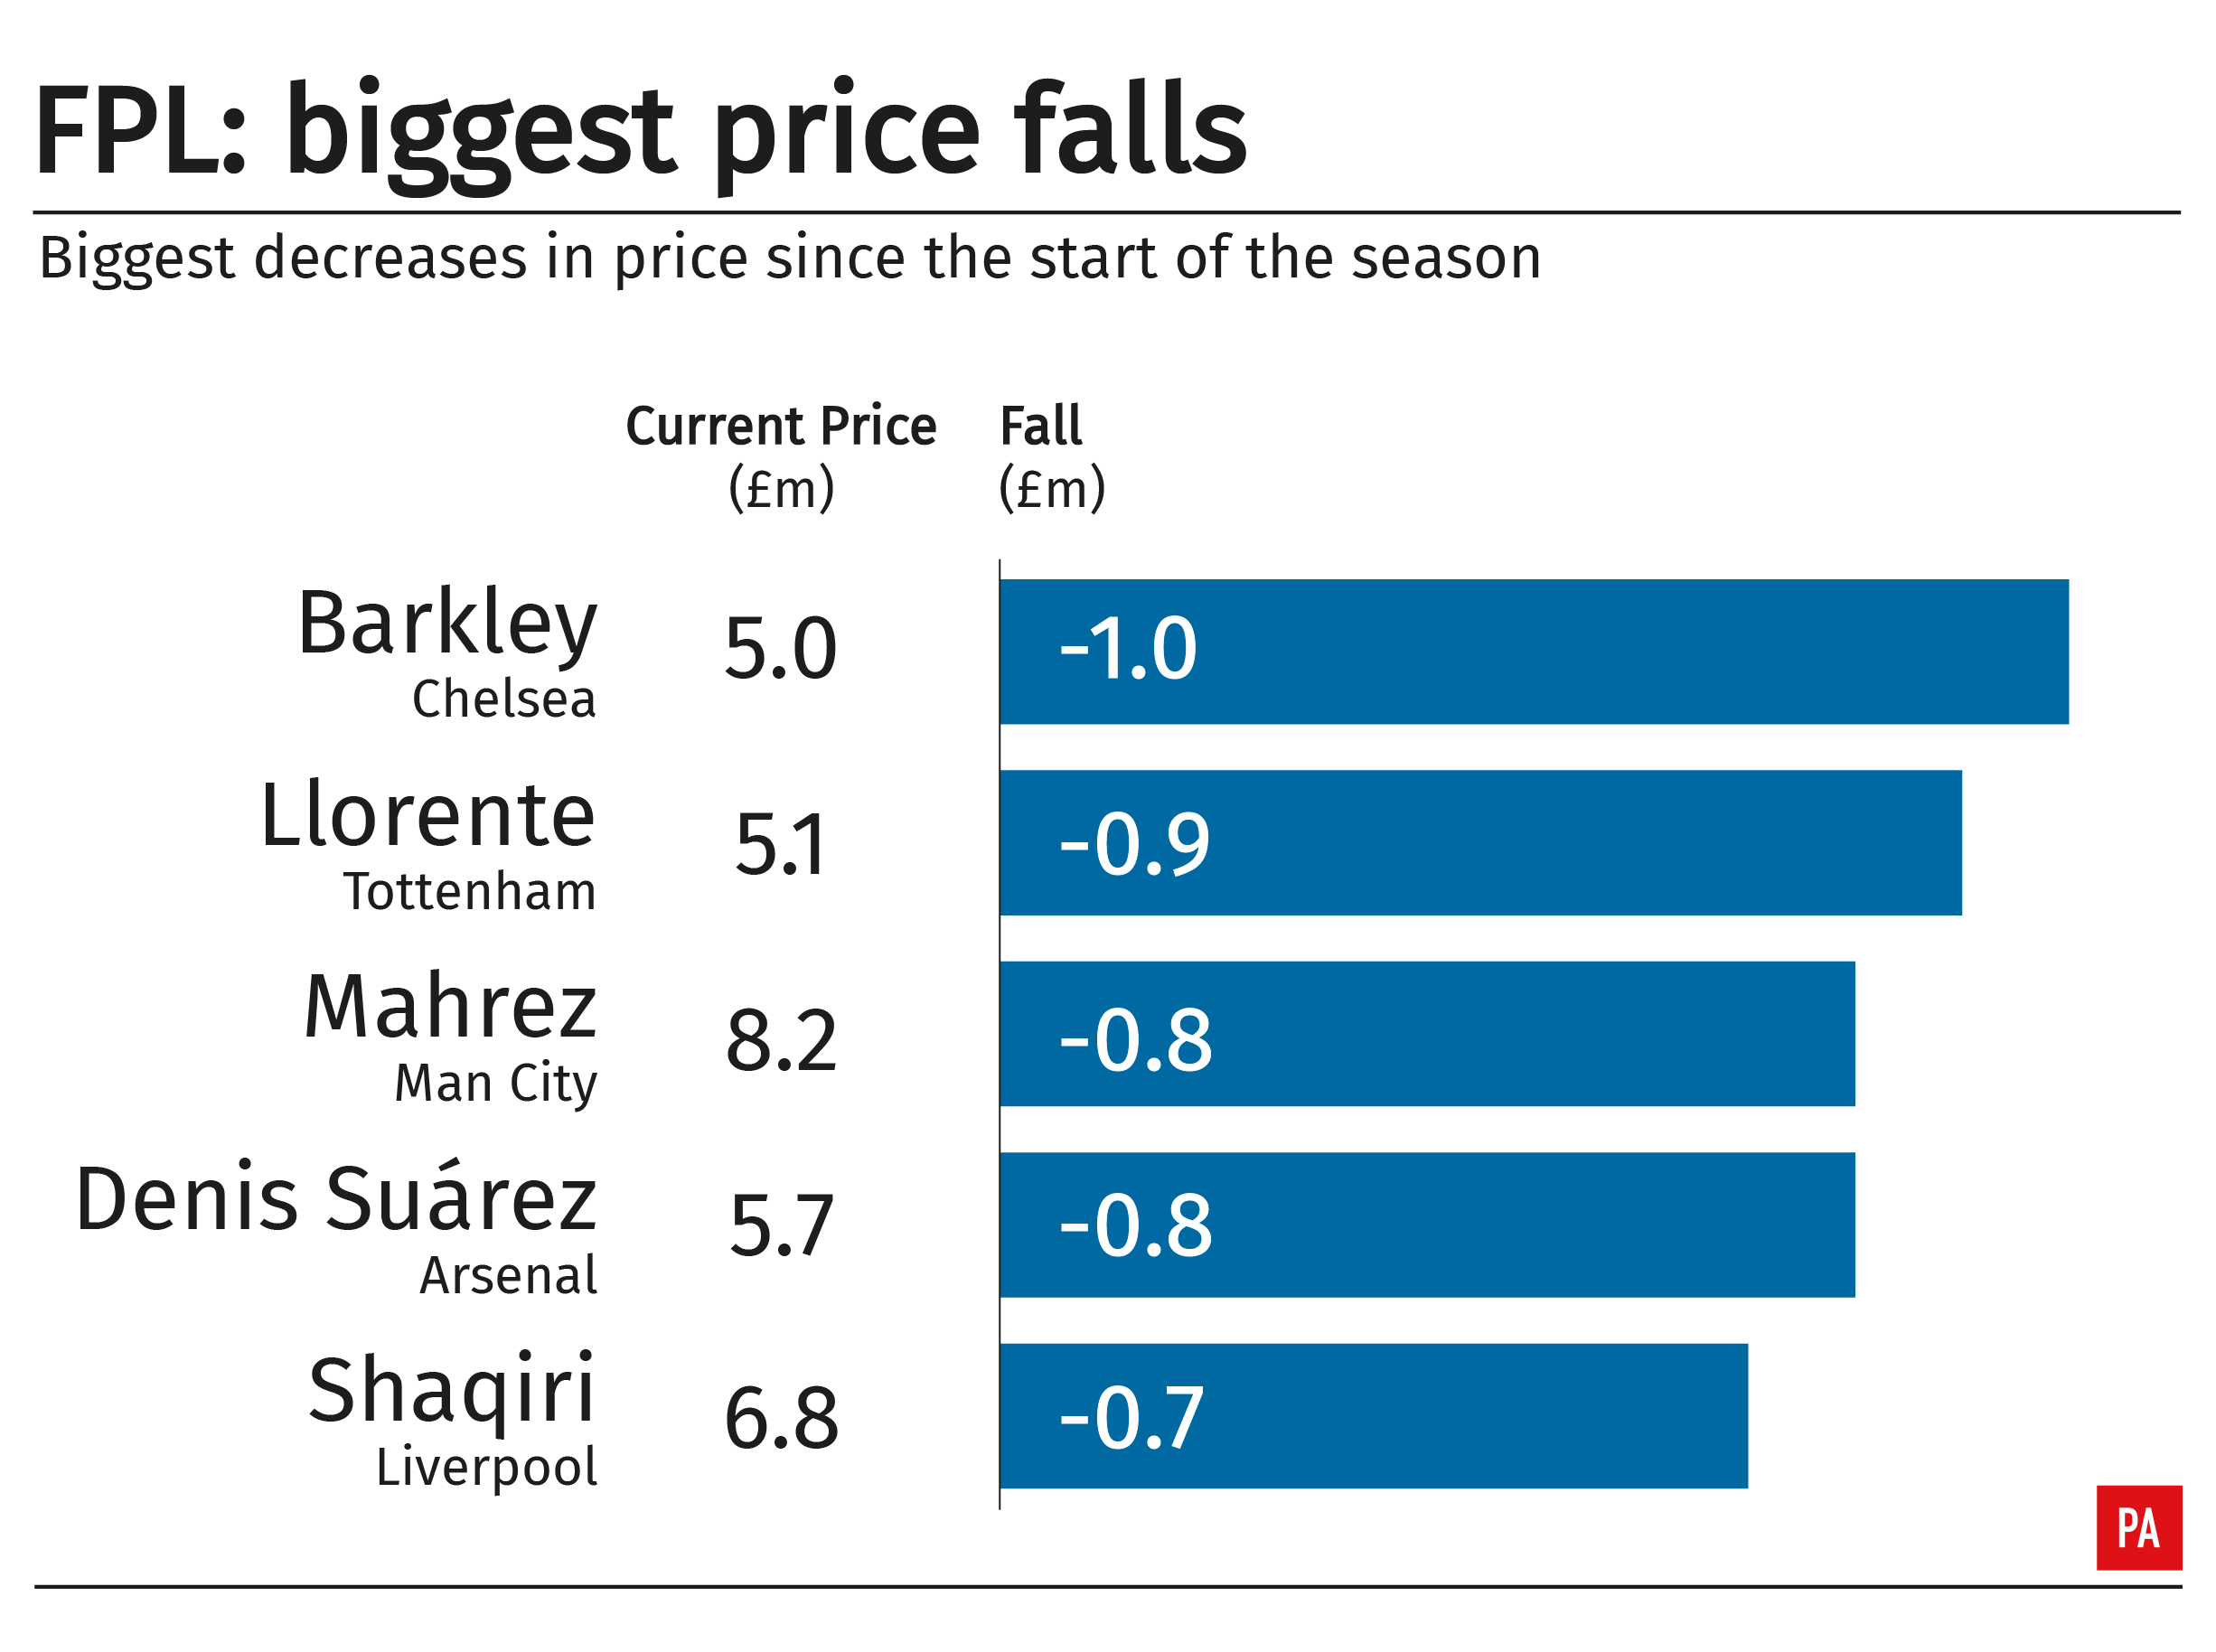 A graphic showing the biggest price falls for footballers in the Fantasy Premier League this season